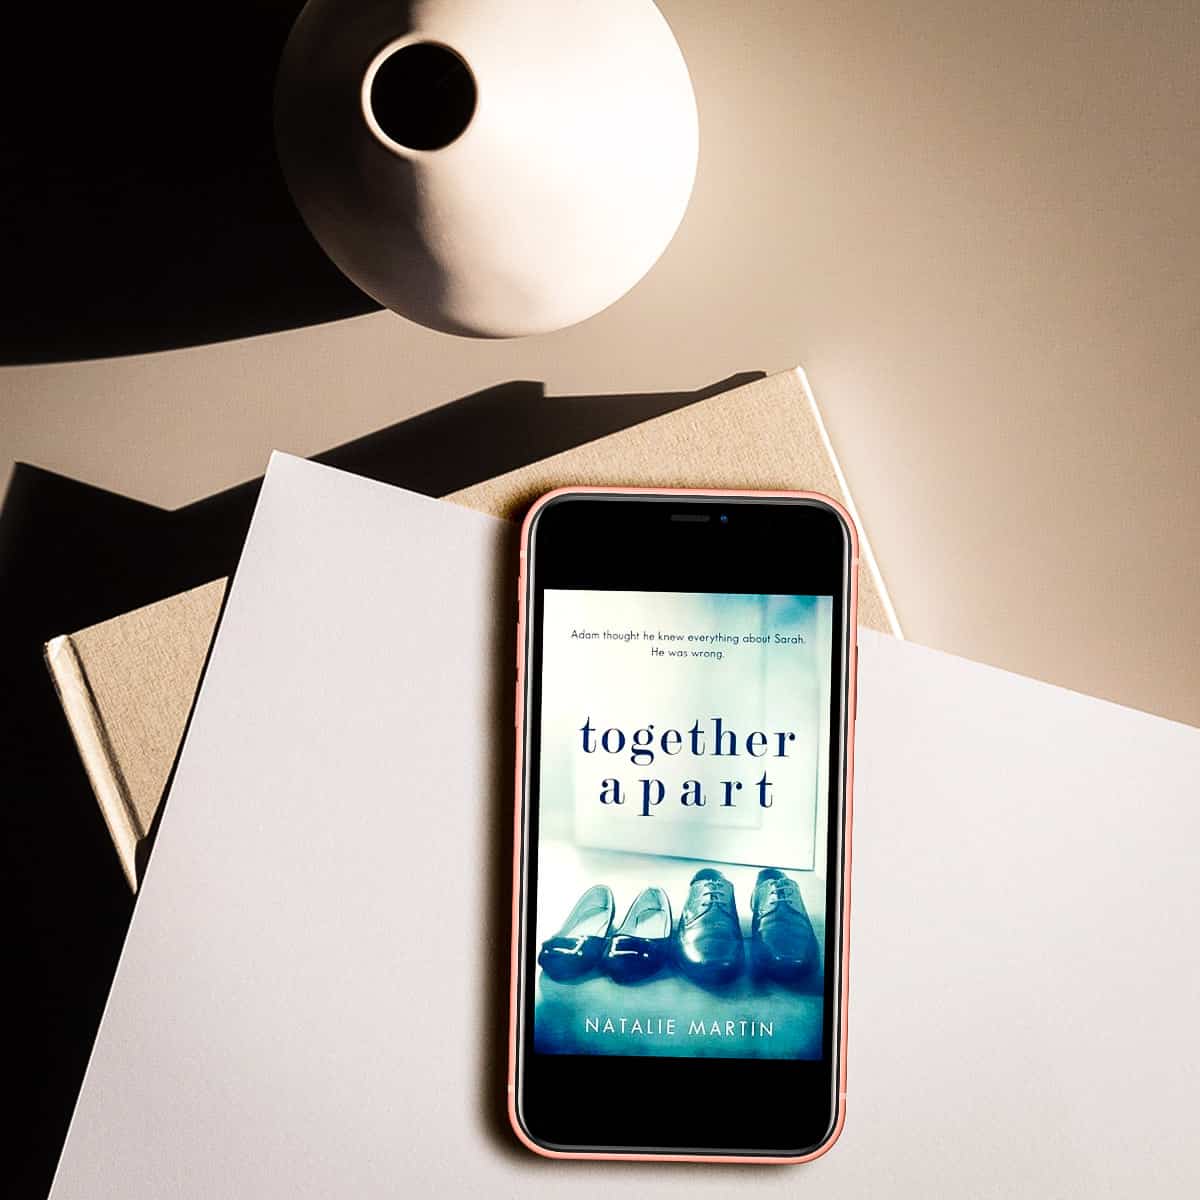 Together Apart by Natalie Martin – Heartbreaking and Raw